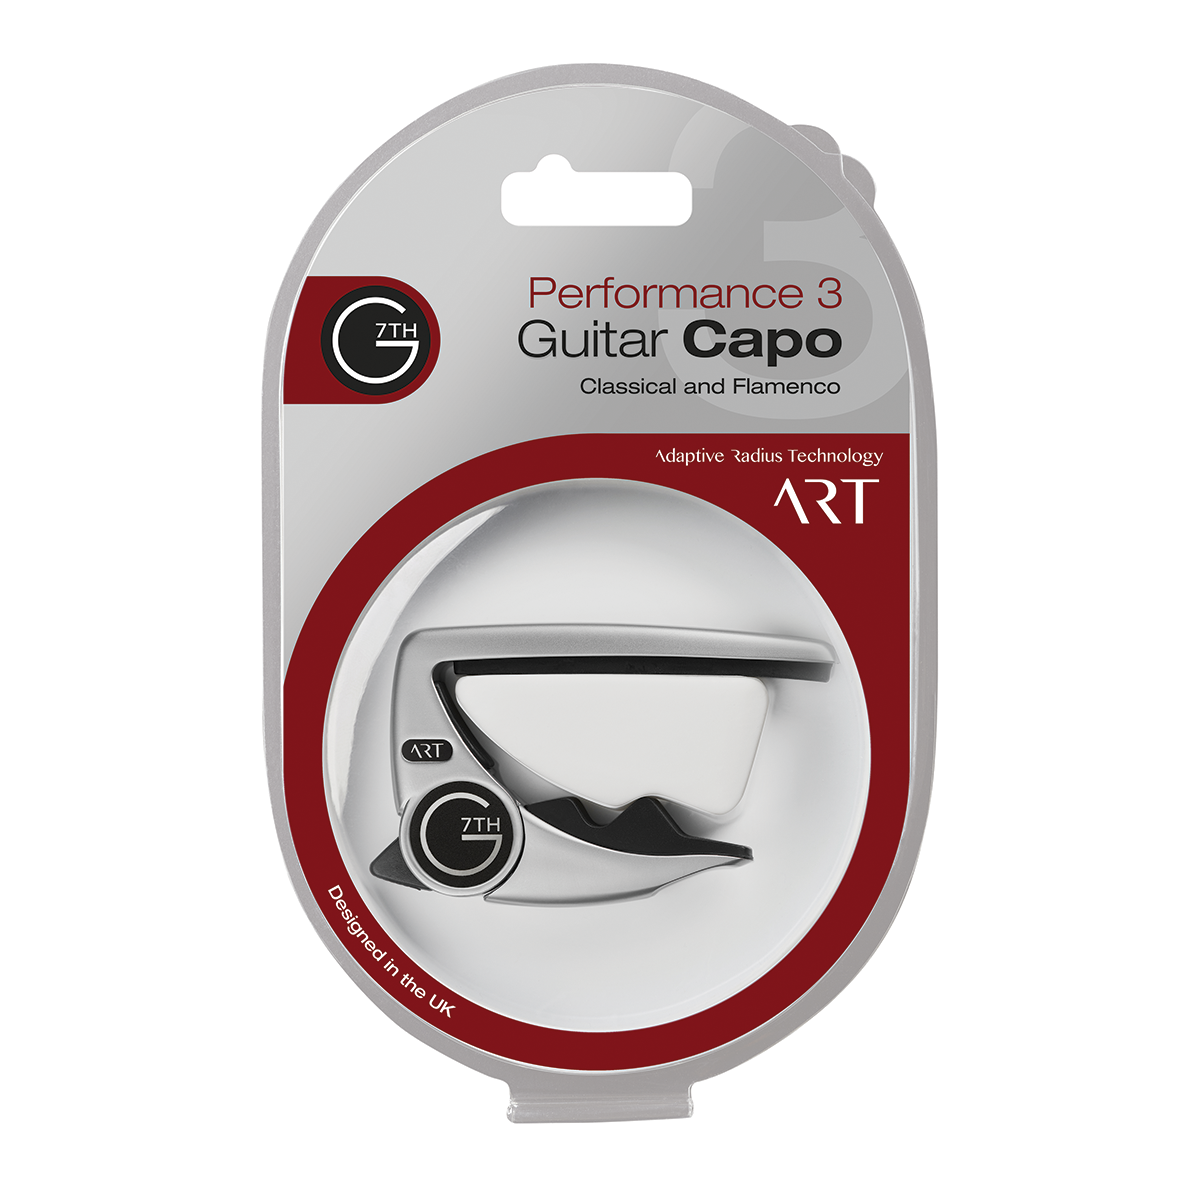 G7th Performance 3 Capo - Classical and Wide Necked, Silver